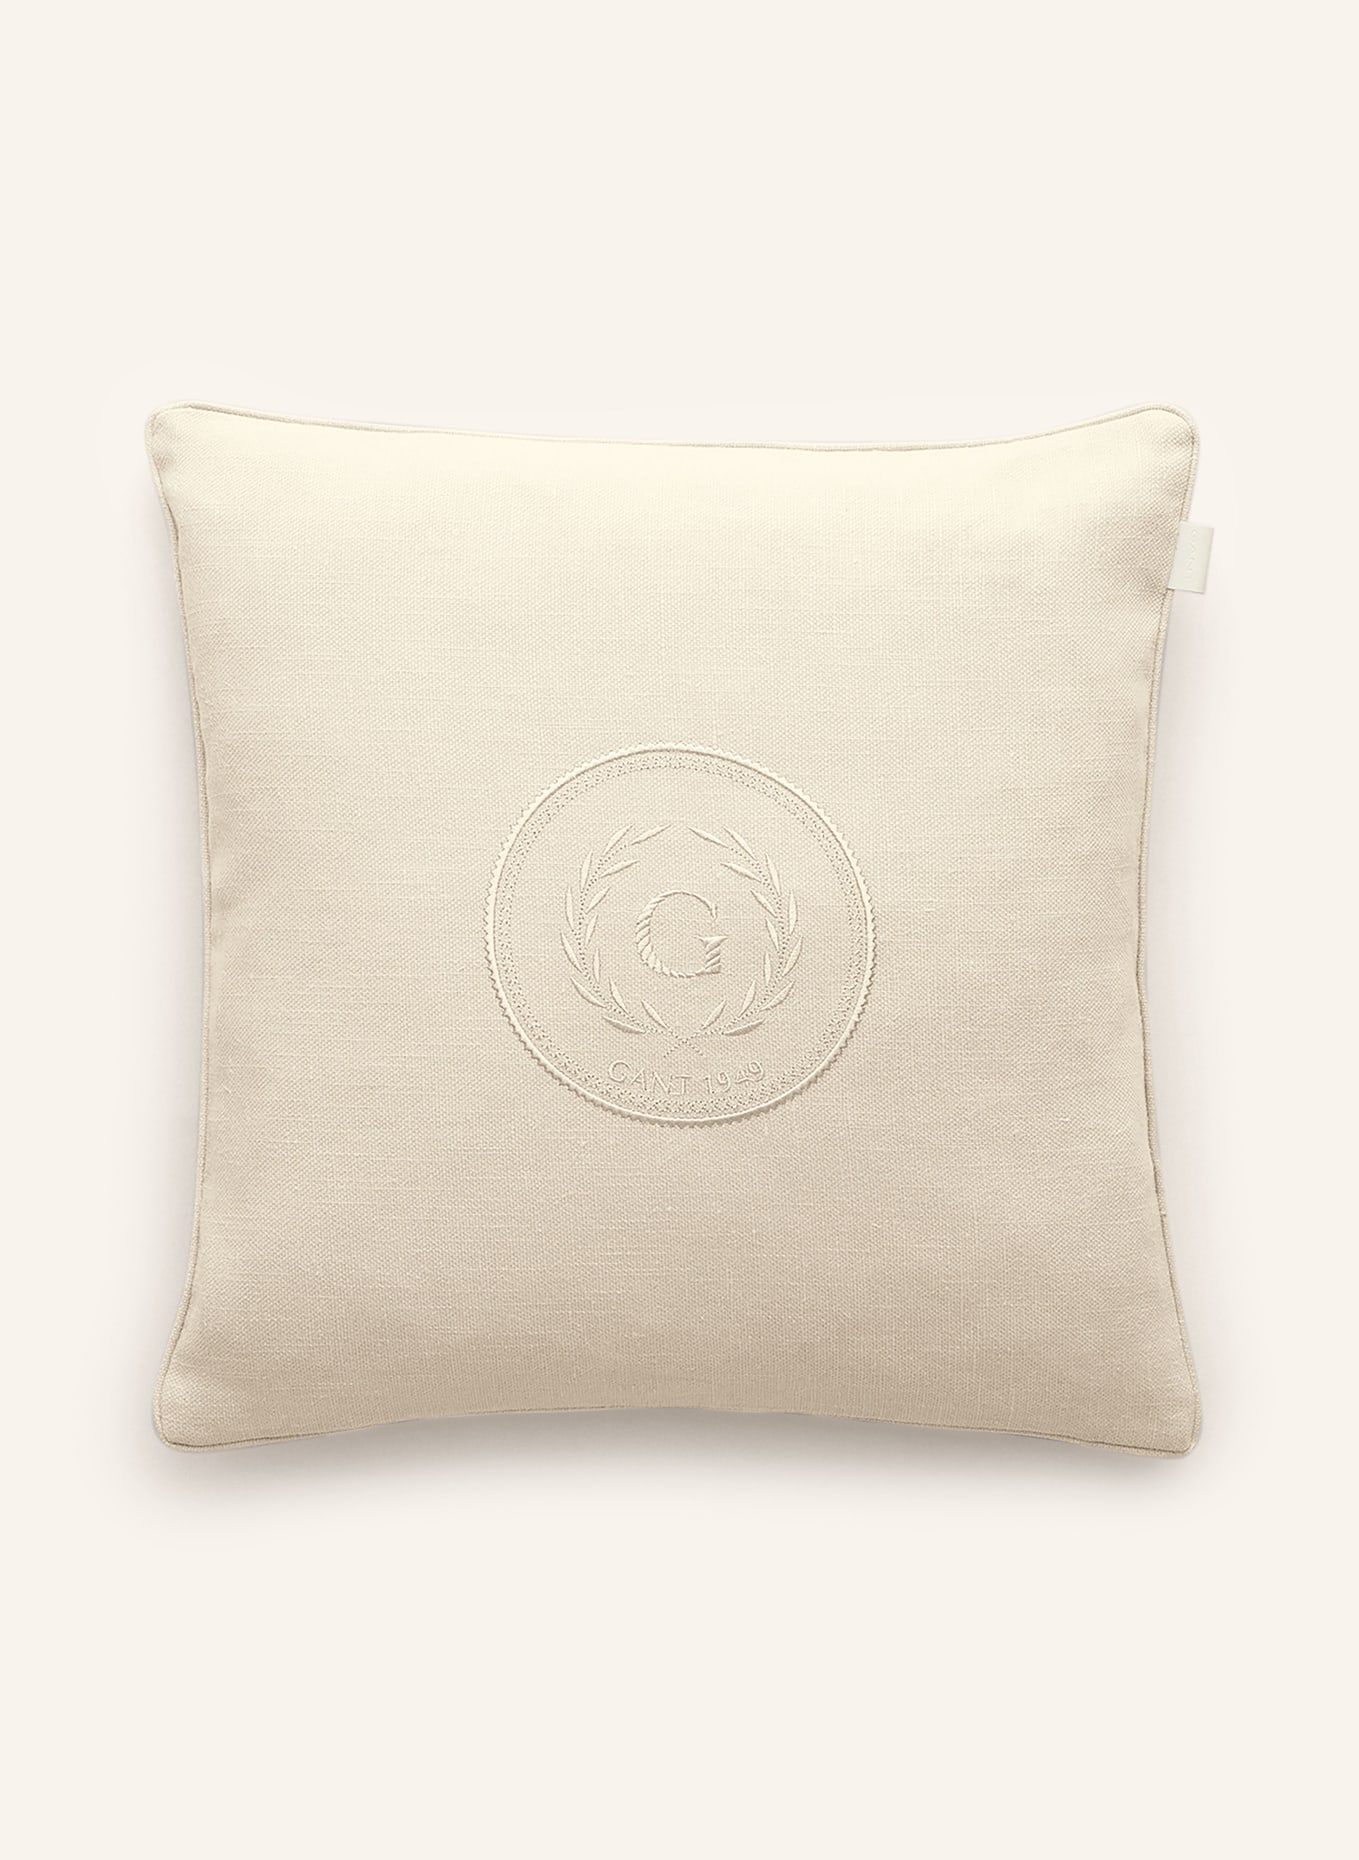 GANT HOME Decorative cushion cover made of linen, Color: CREAM (Image 1)